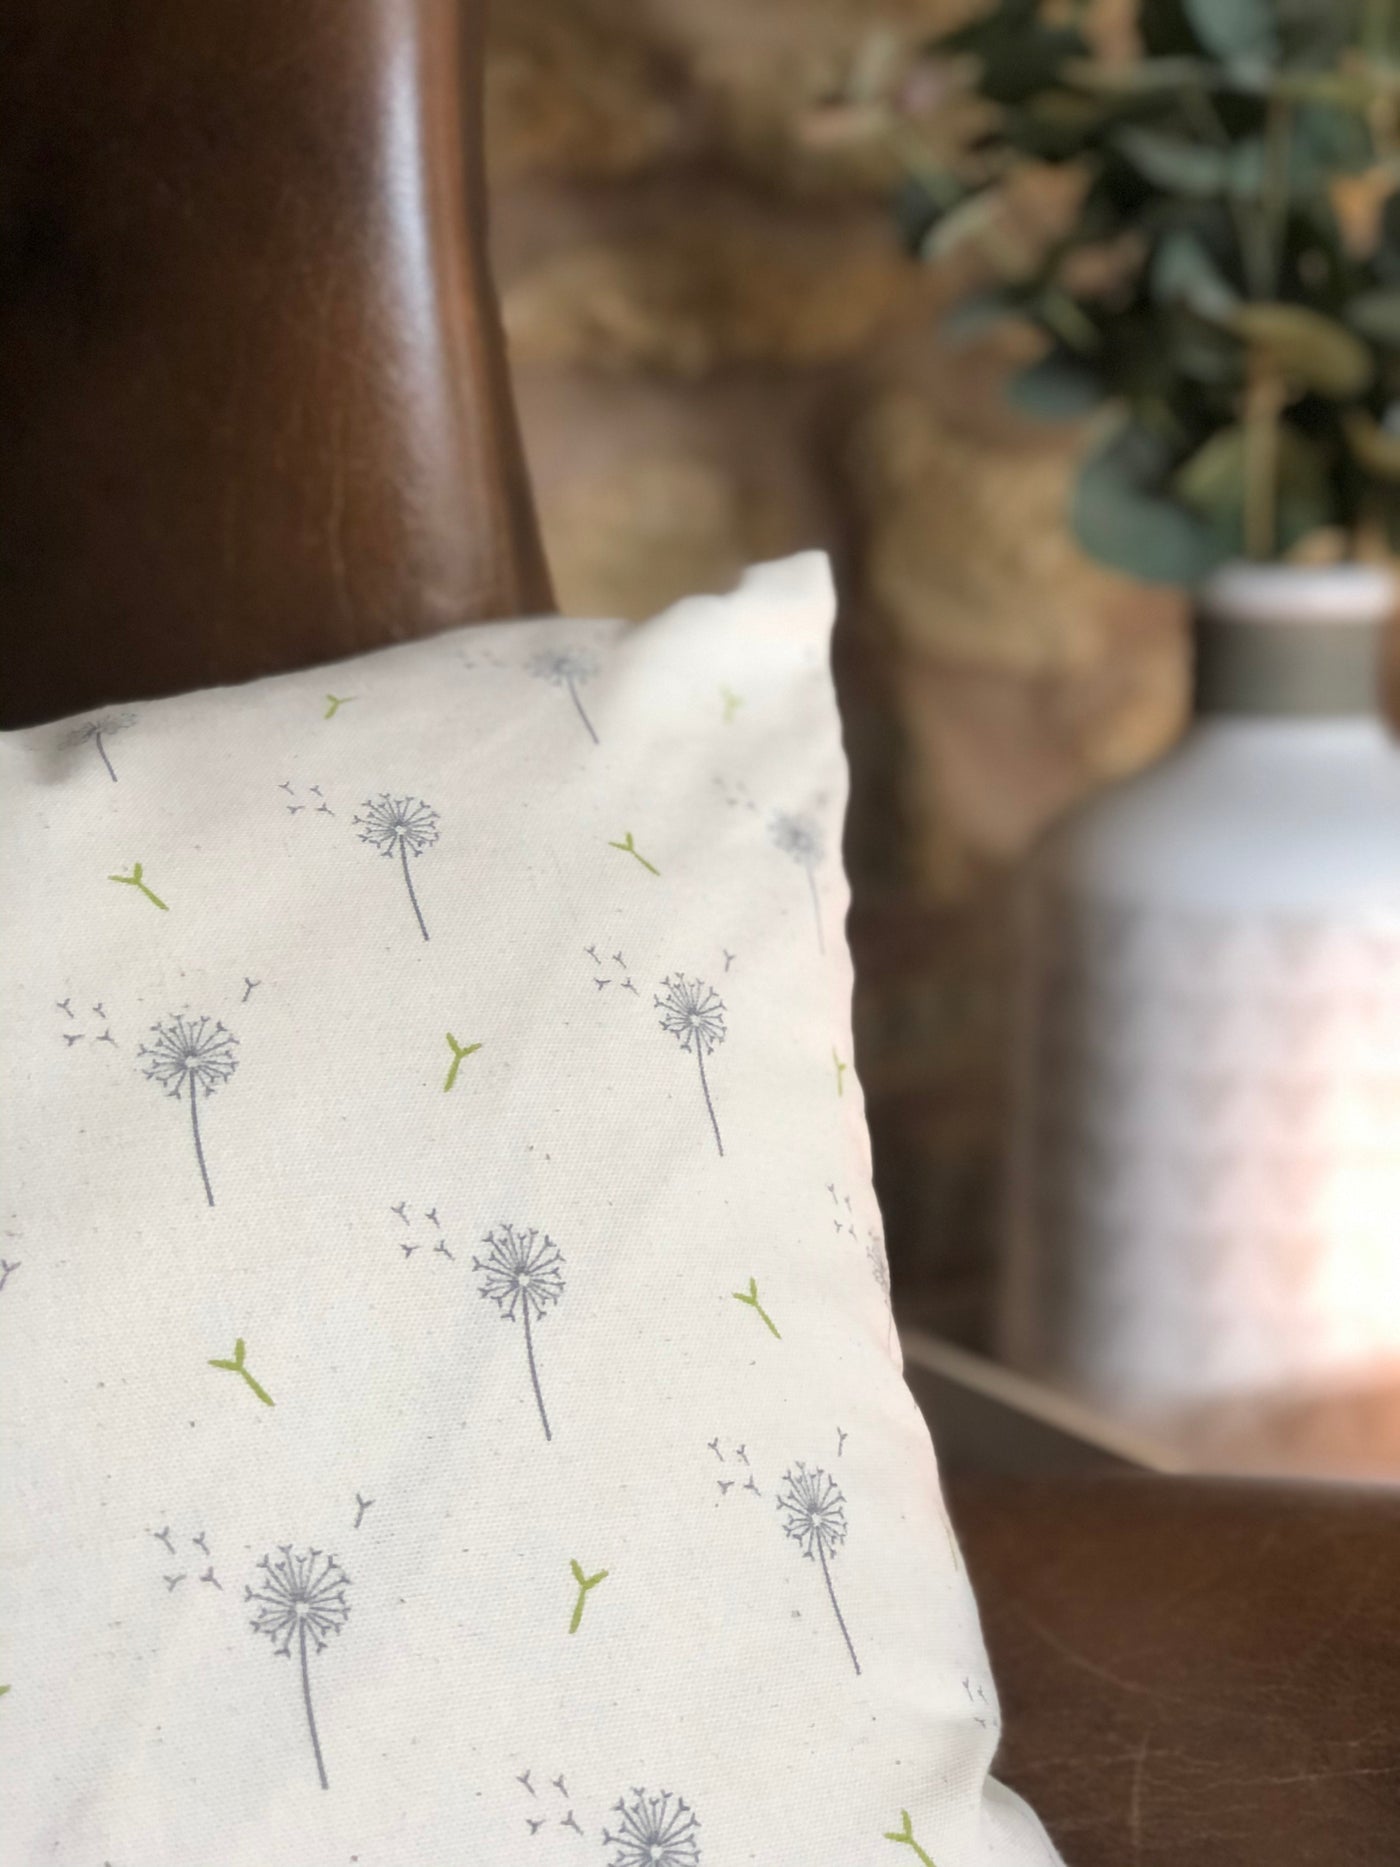 Cushion Cover - 'Dandelion Wishes'